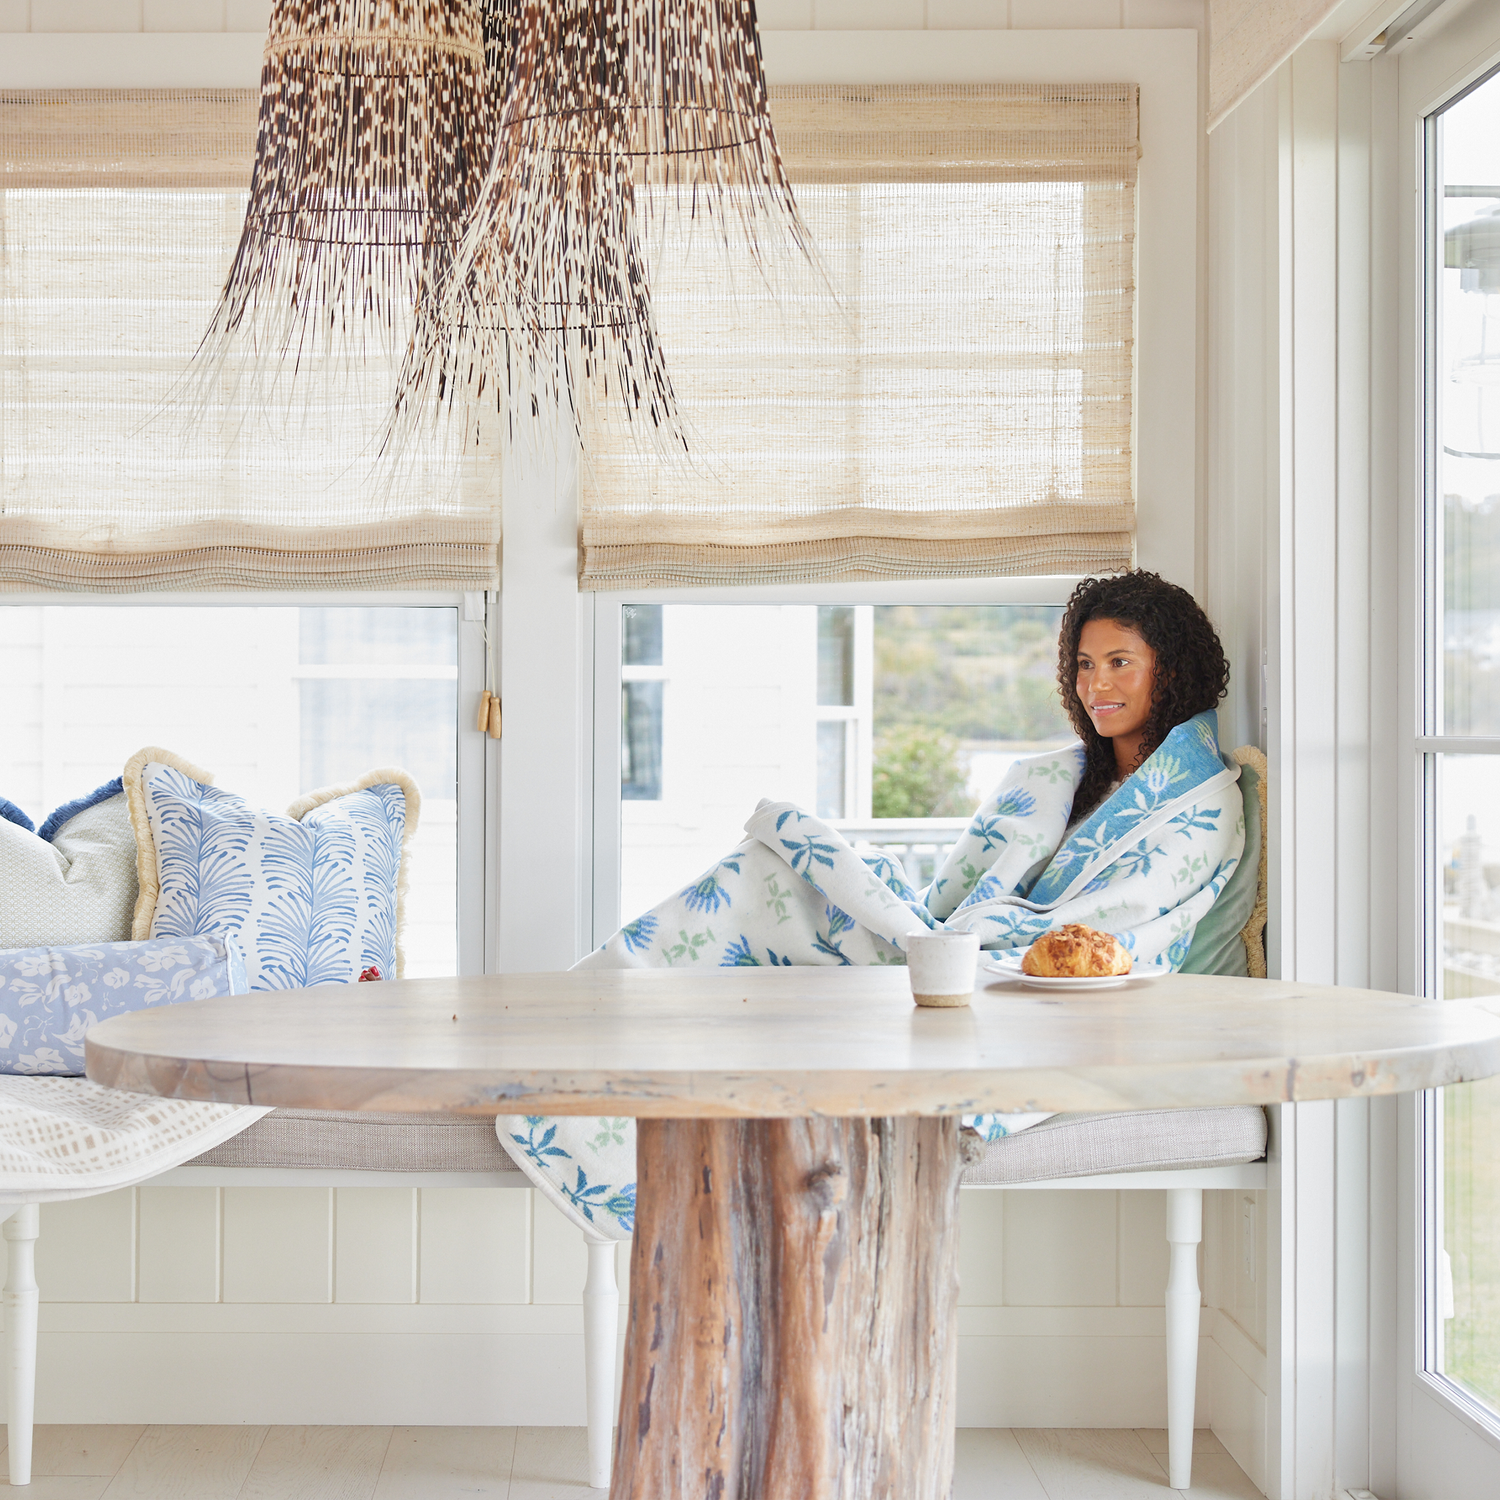 Breakfast bench with a woman next to a Sky Blue Botanical Stripe Pillow and a Blue and Green Floral Blanket.